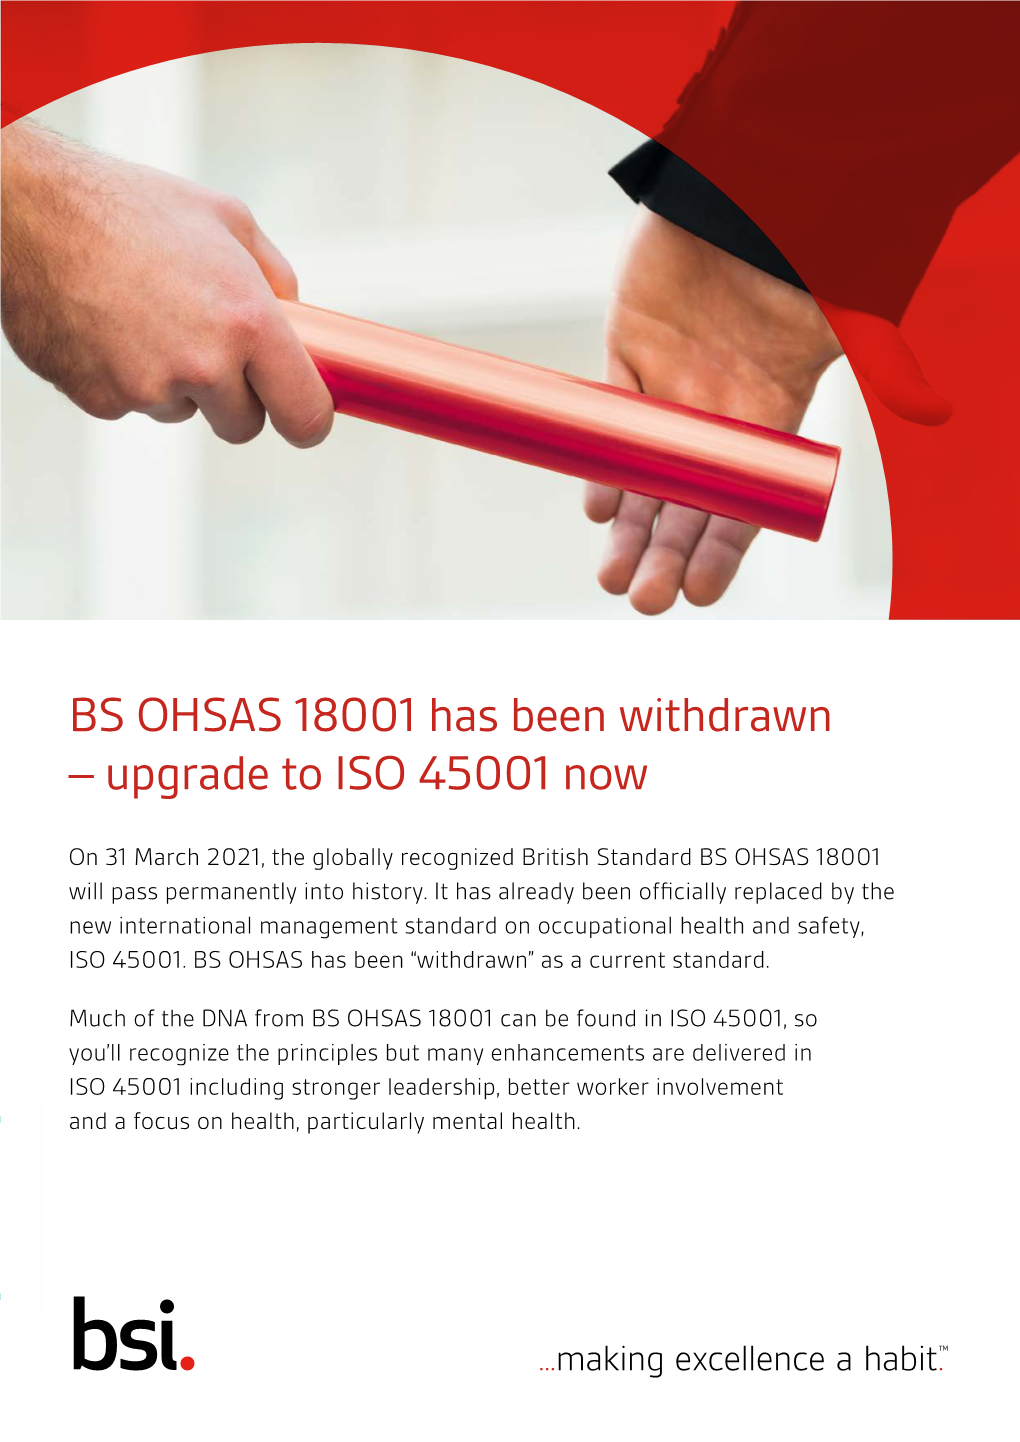 BS OHSAS 18001 Has Been Withdrawn – Upgrade to ISO 45001 Now